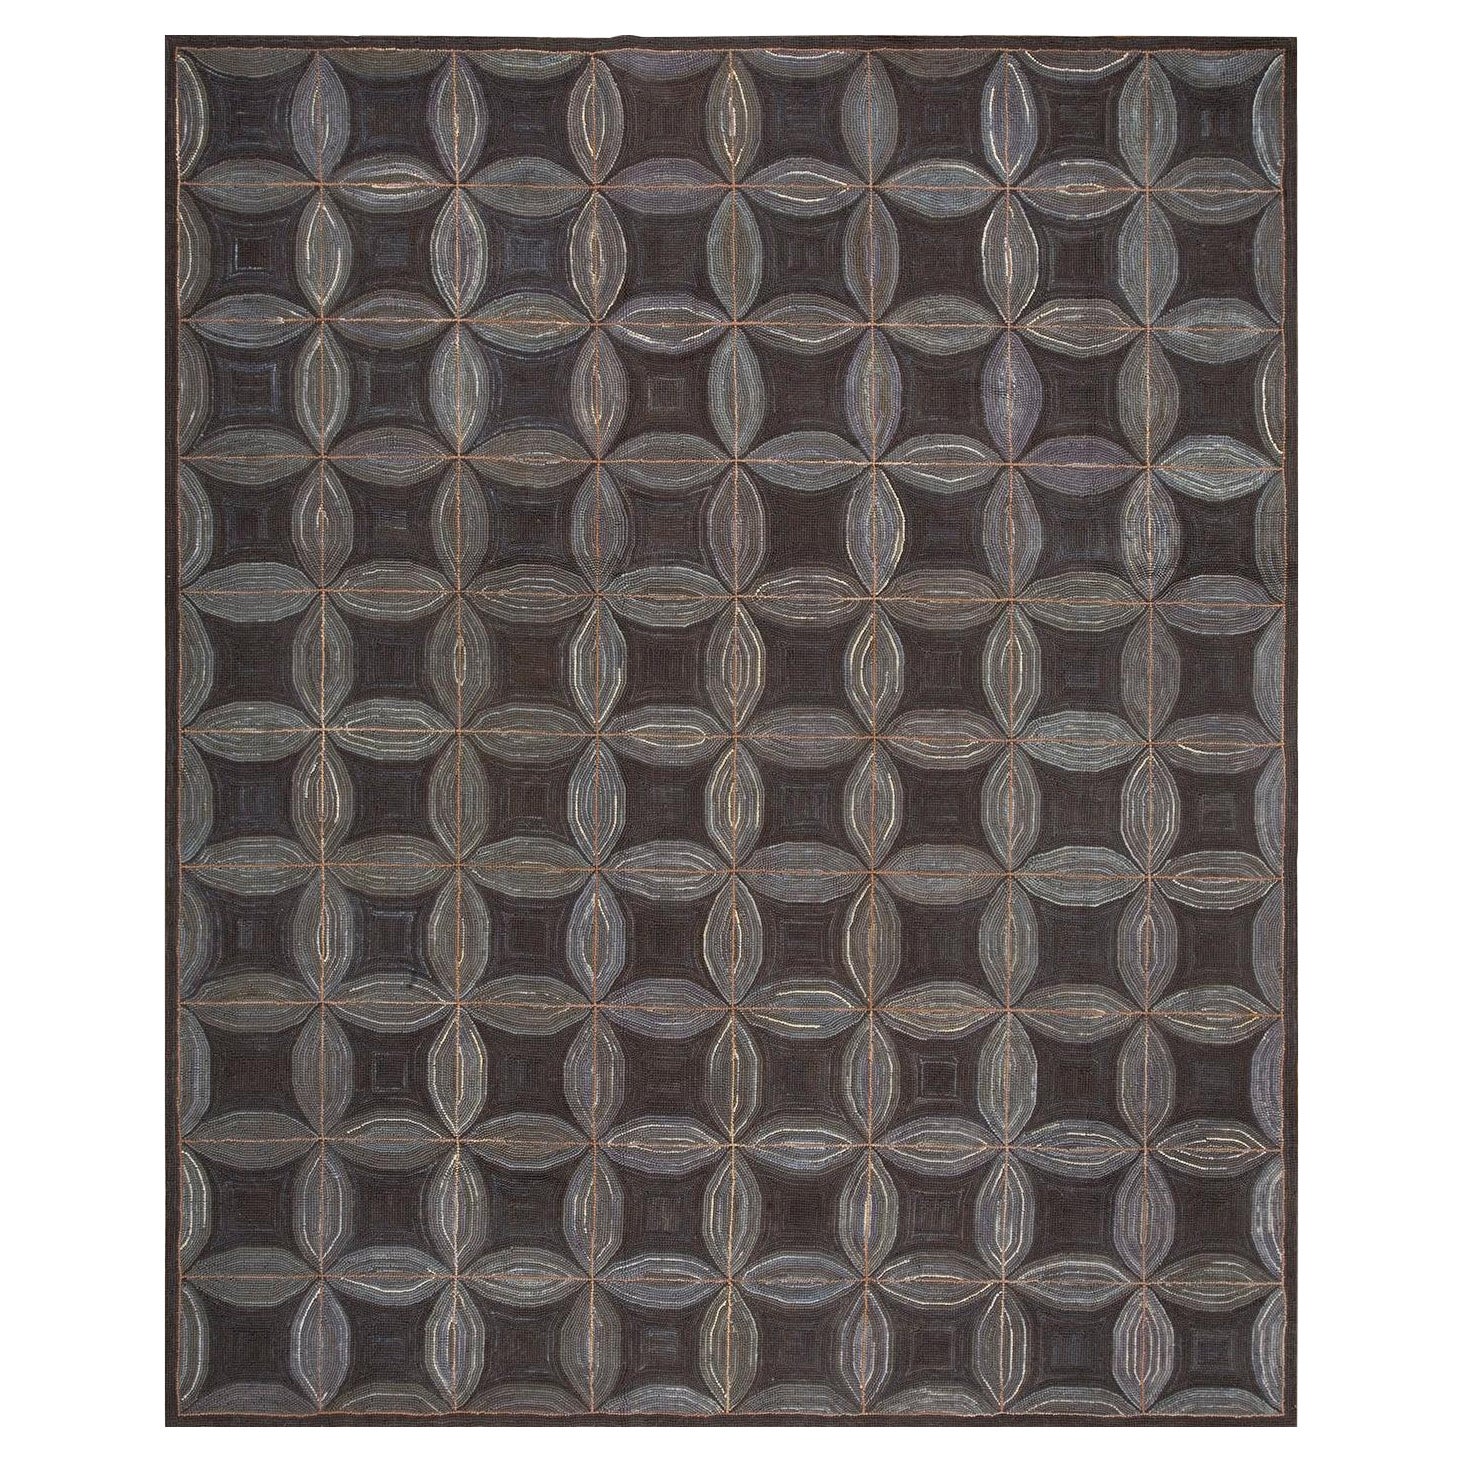 Contemporary American Hooked Rug 6' 0" x 9' 0" (183 x 274 cm)